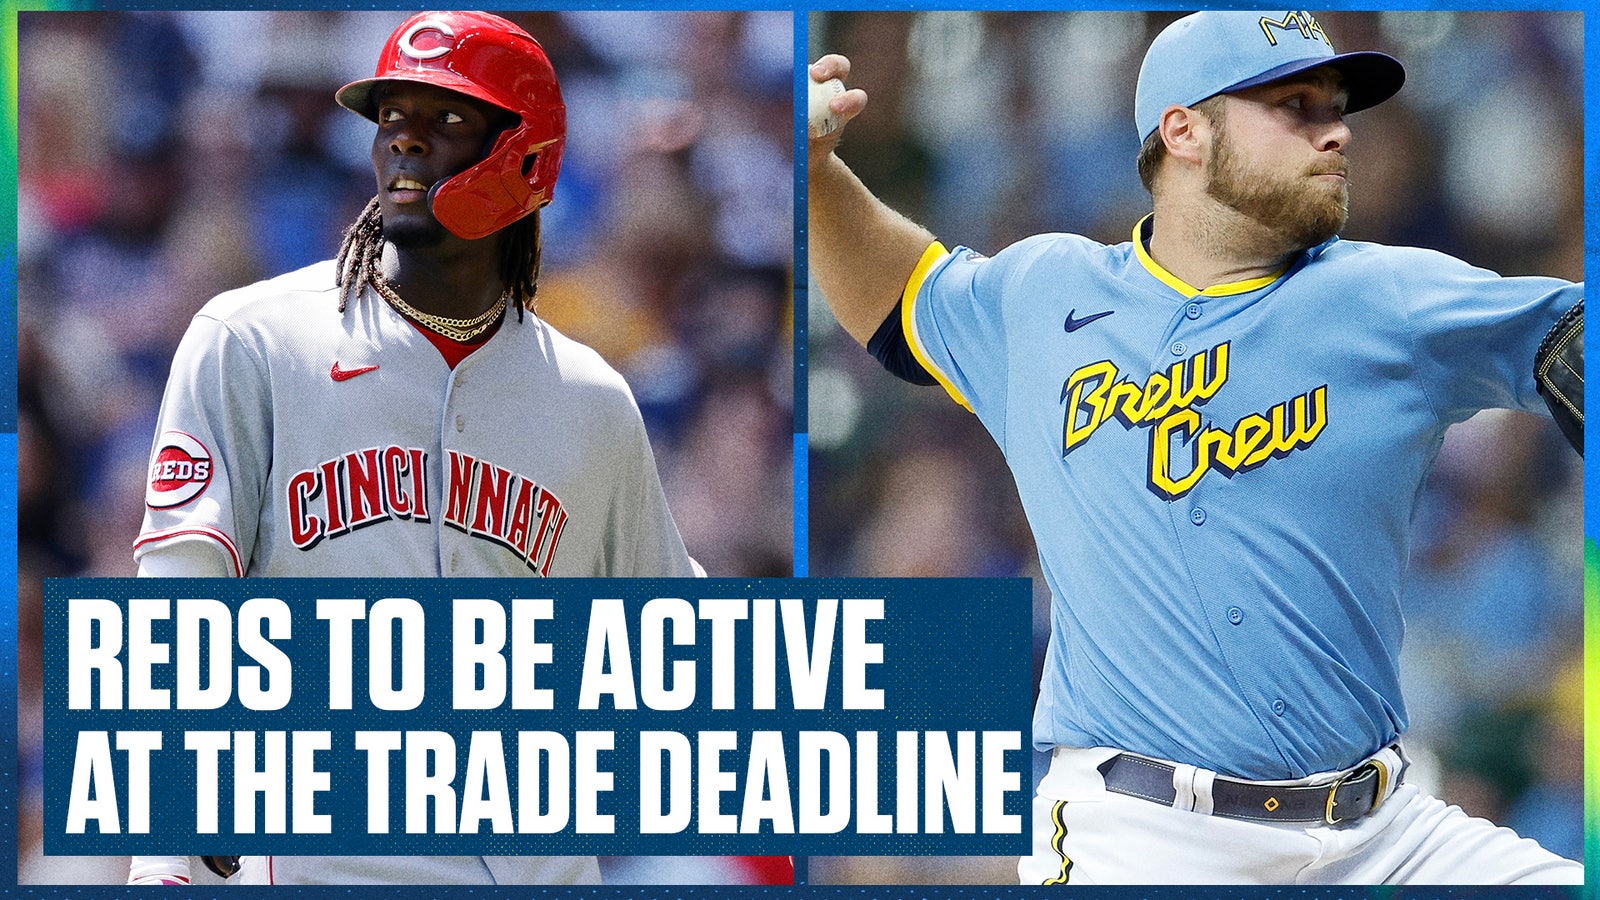 Will the Reds be more aggressive than the Brewers at the trade deadline? 